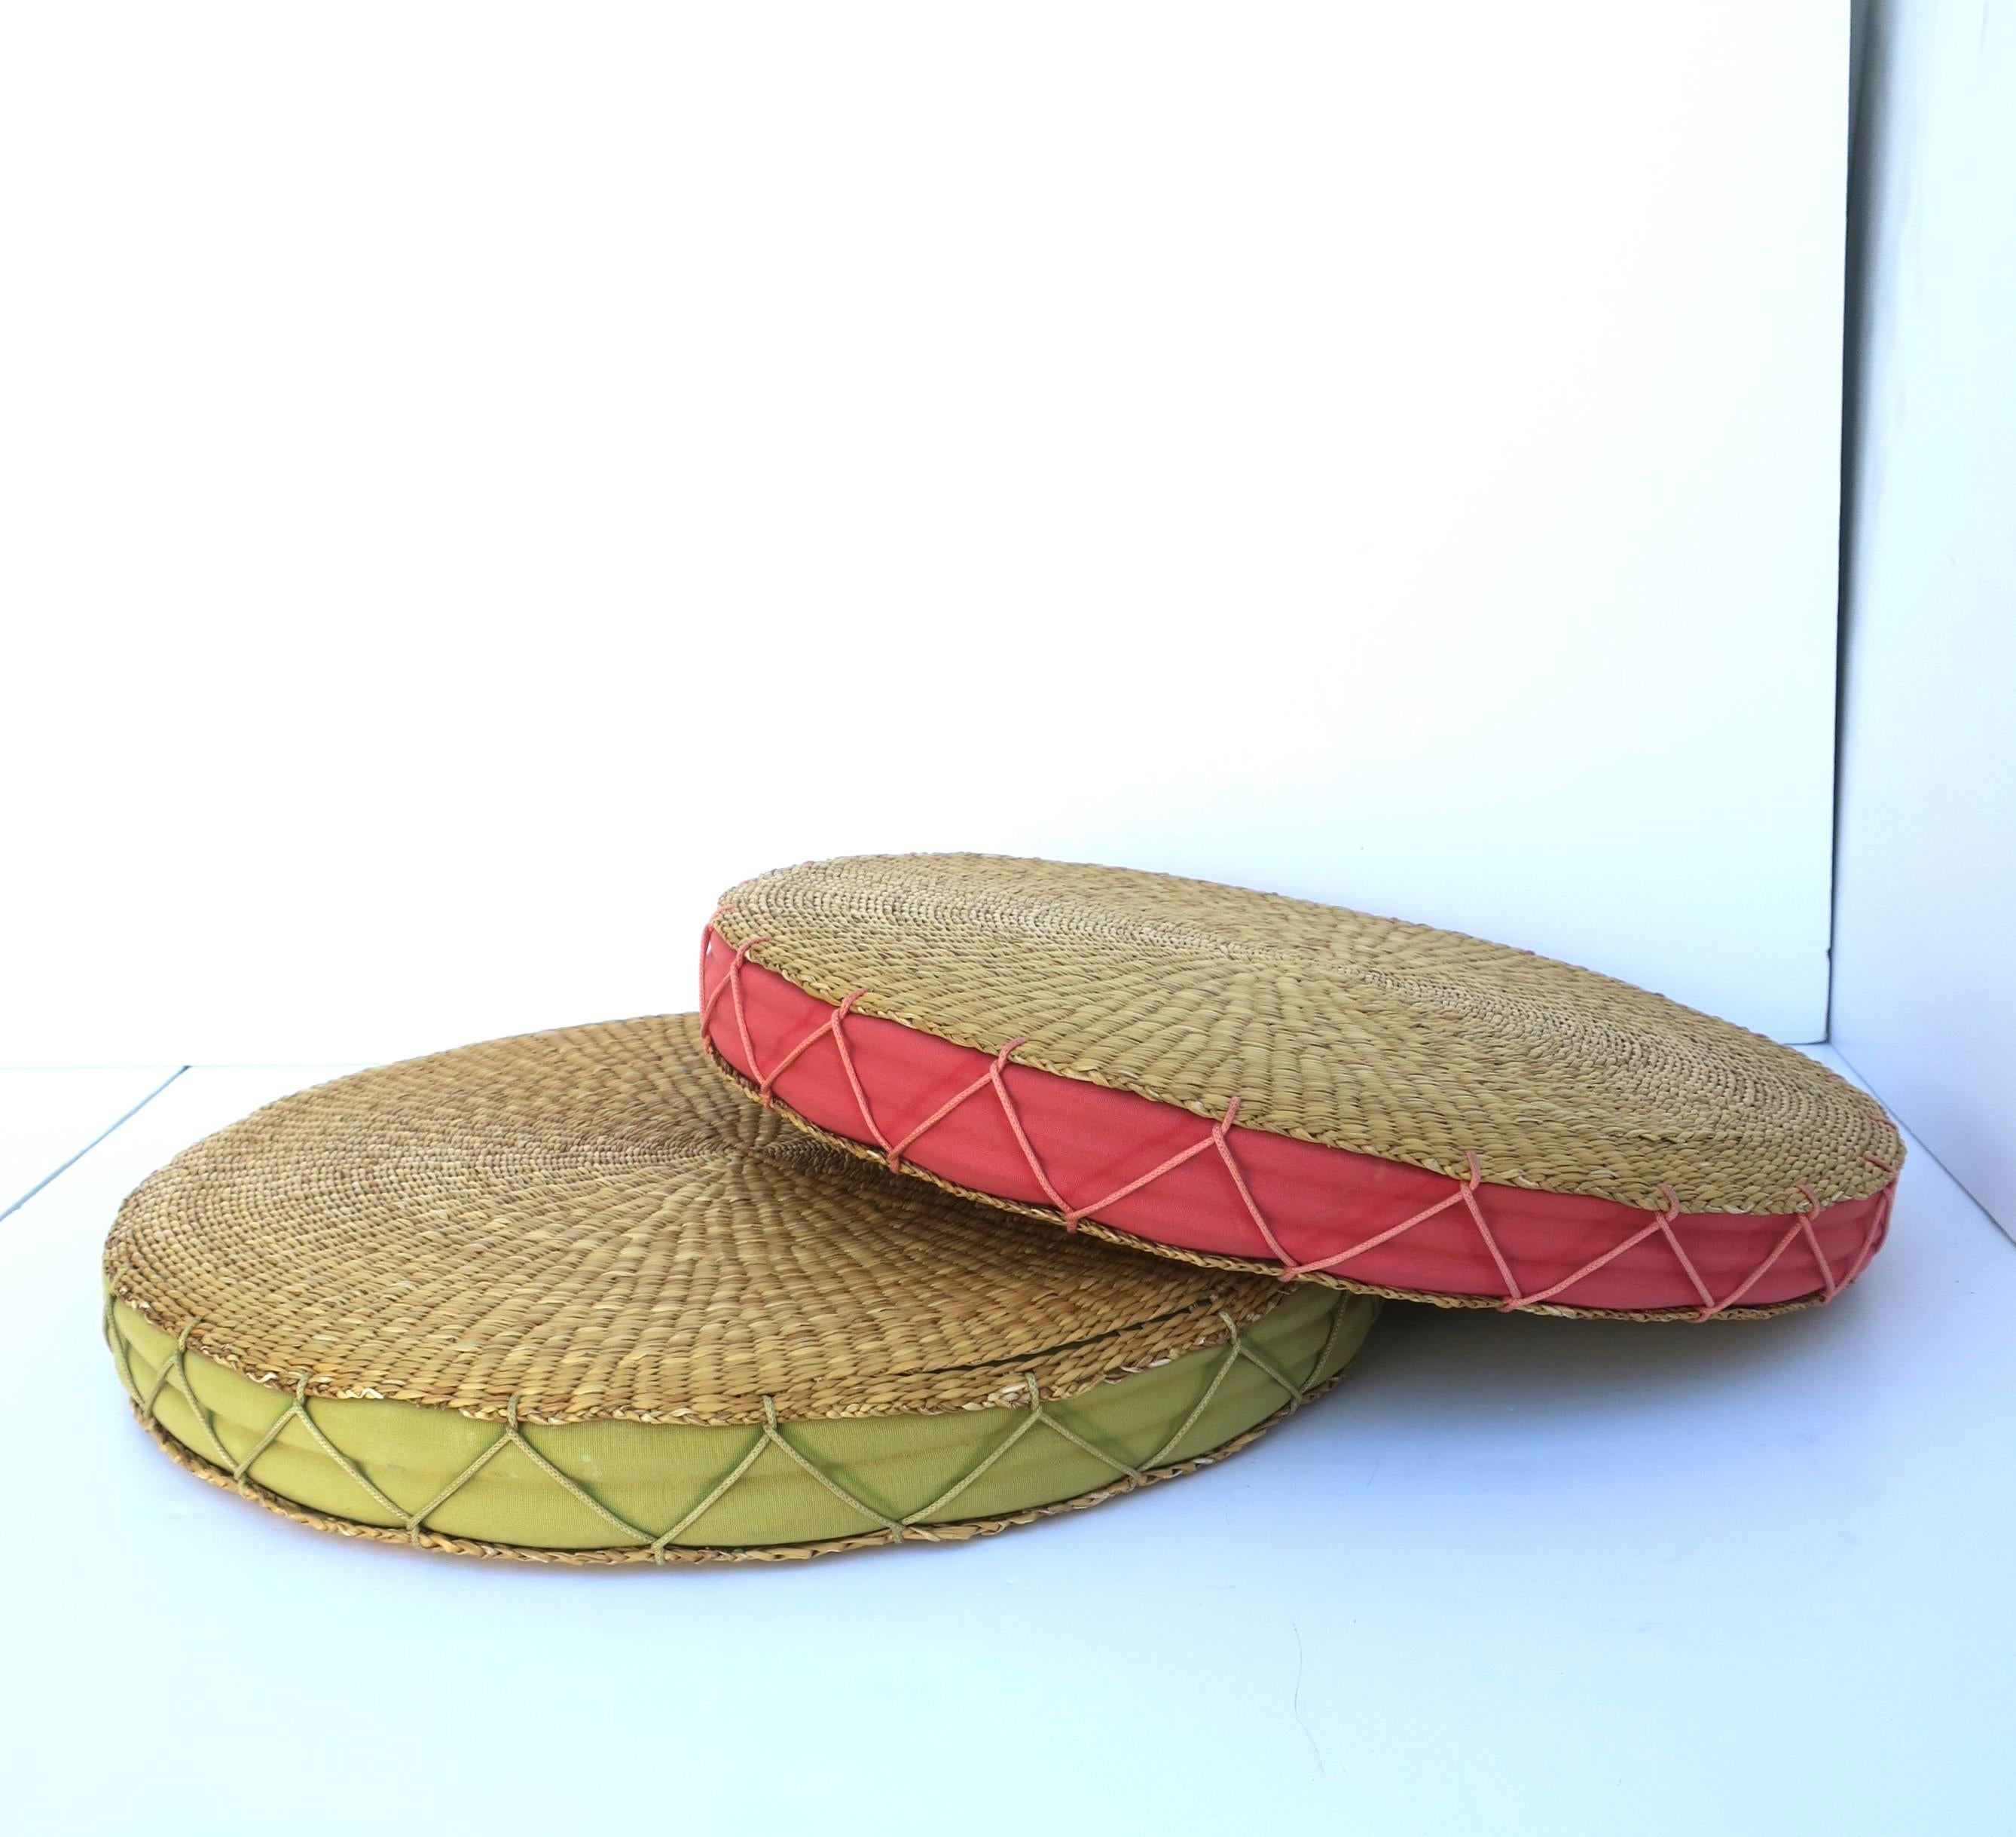 Wicker Seat or Floor Cushion, Watermelon Pink and Tan In Good Condition For Sale In New York, NY